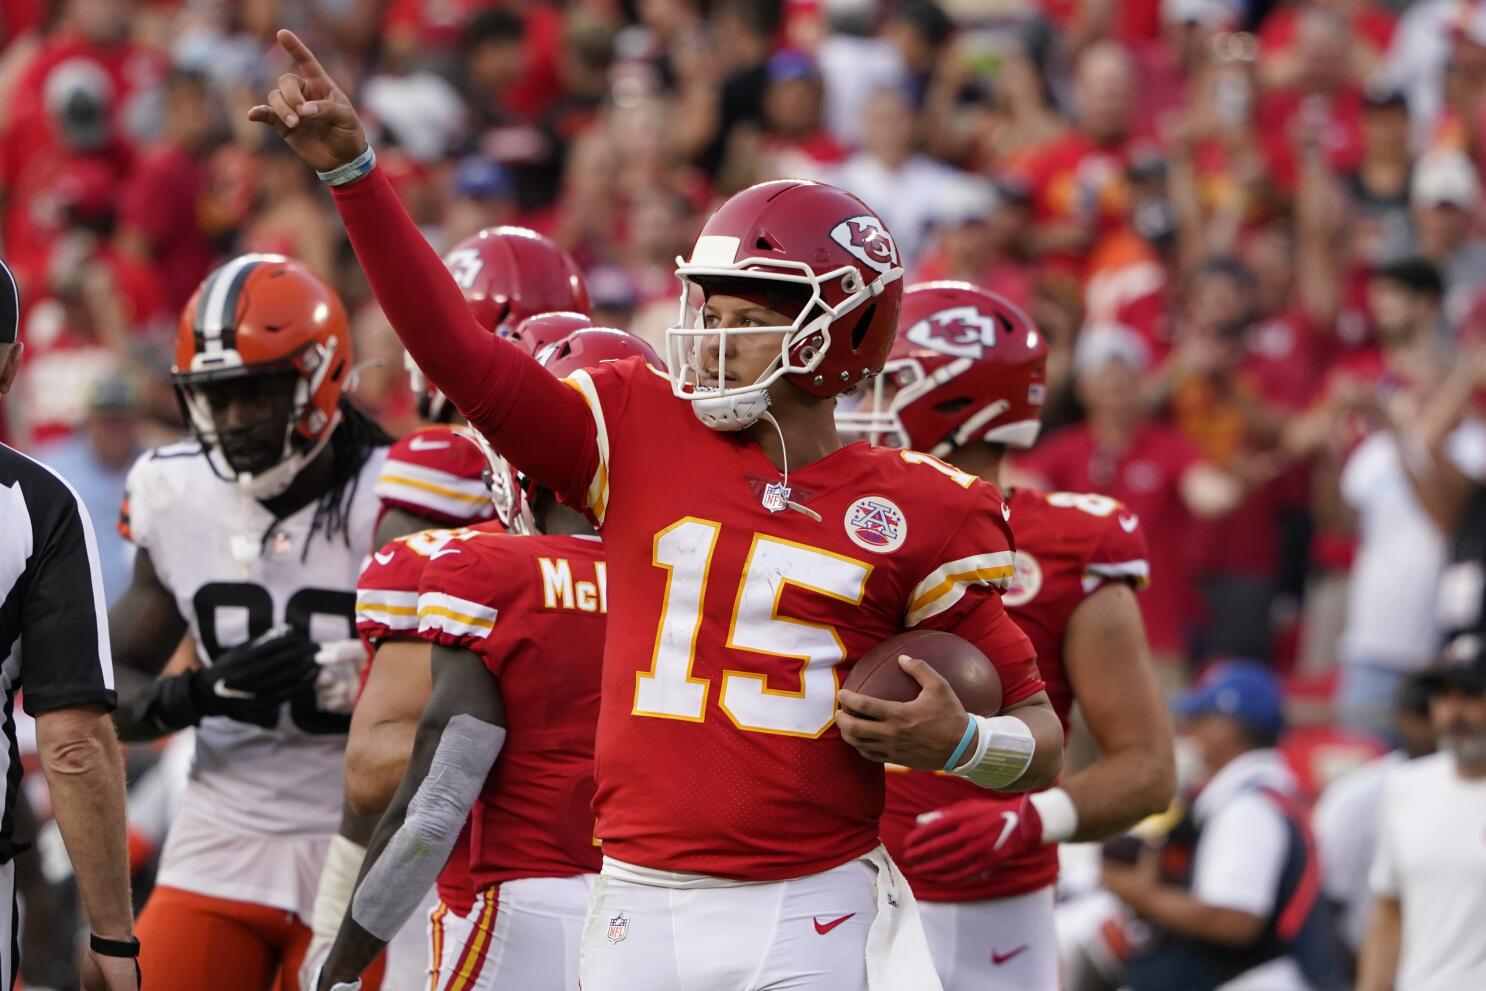 Patrick Mahomes Celebrates Super Bowl Victory with Trophy, WWE Belt